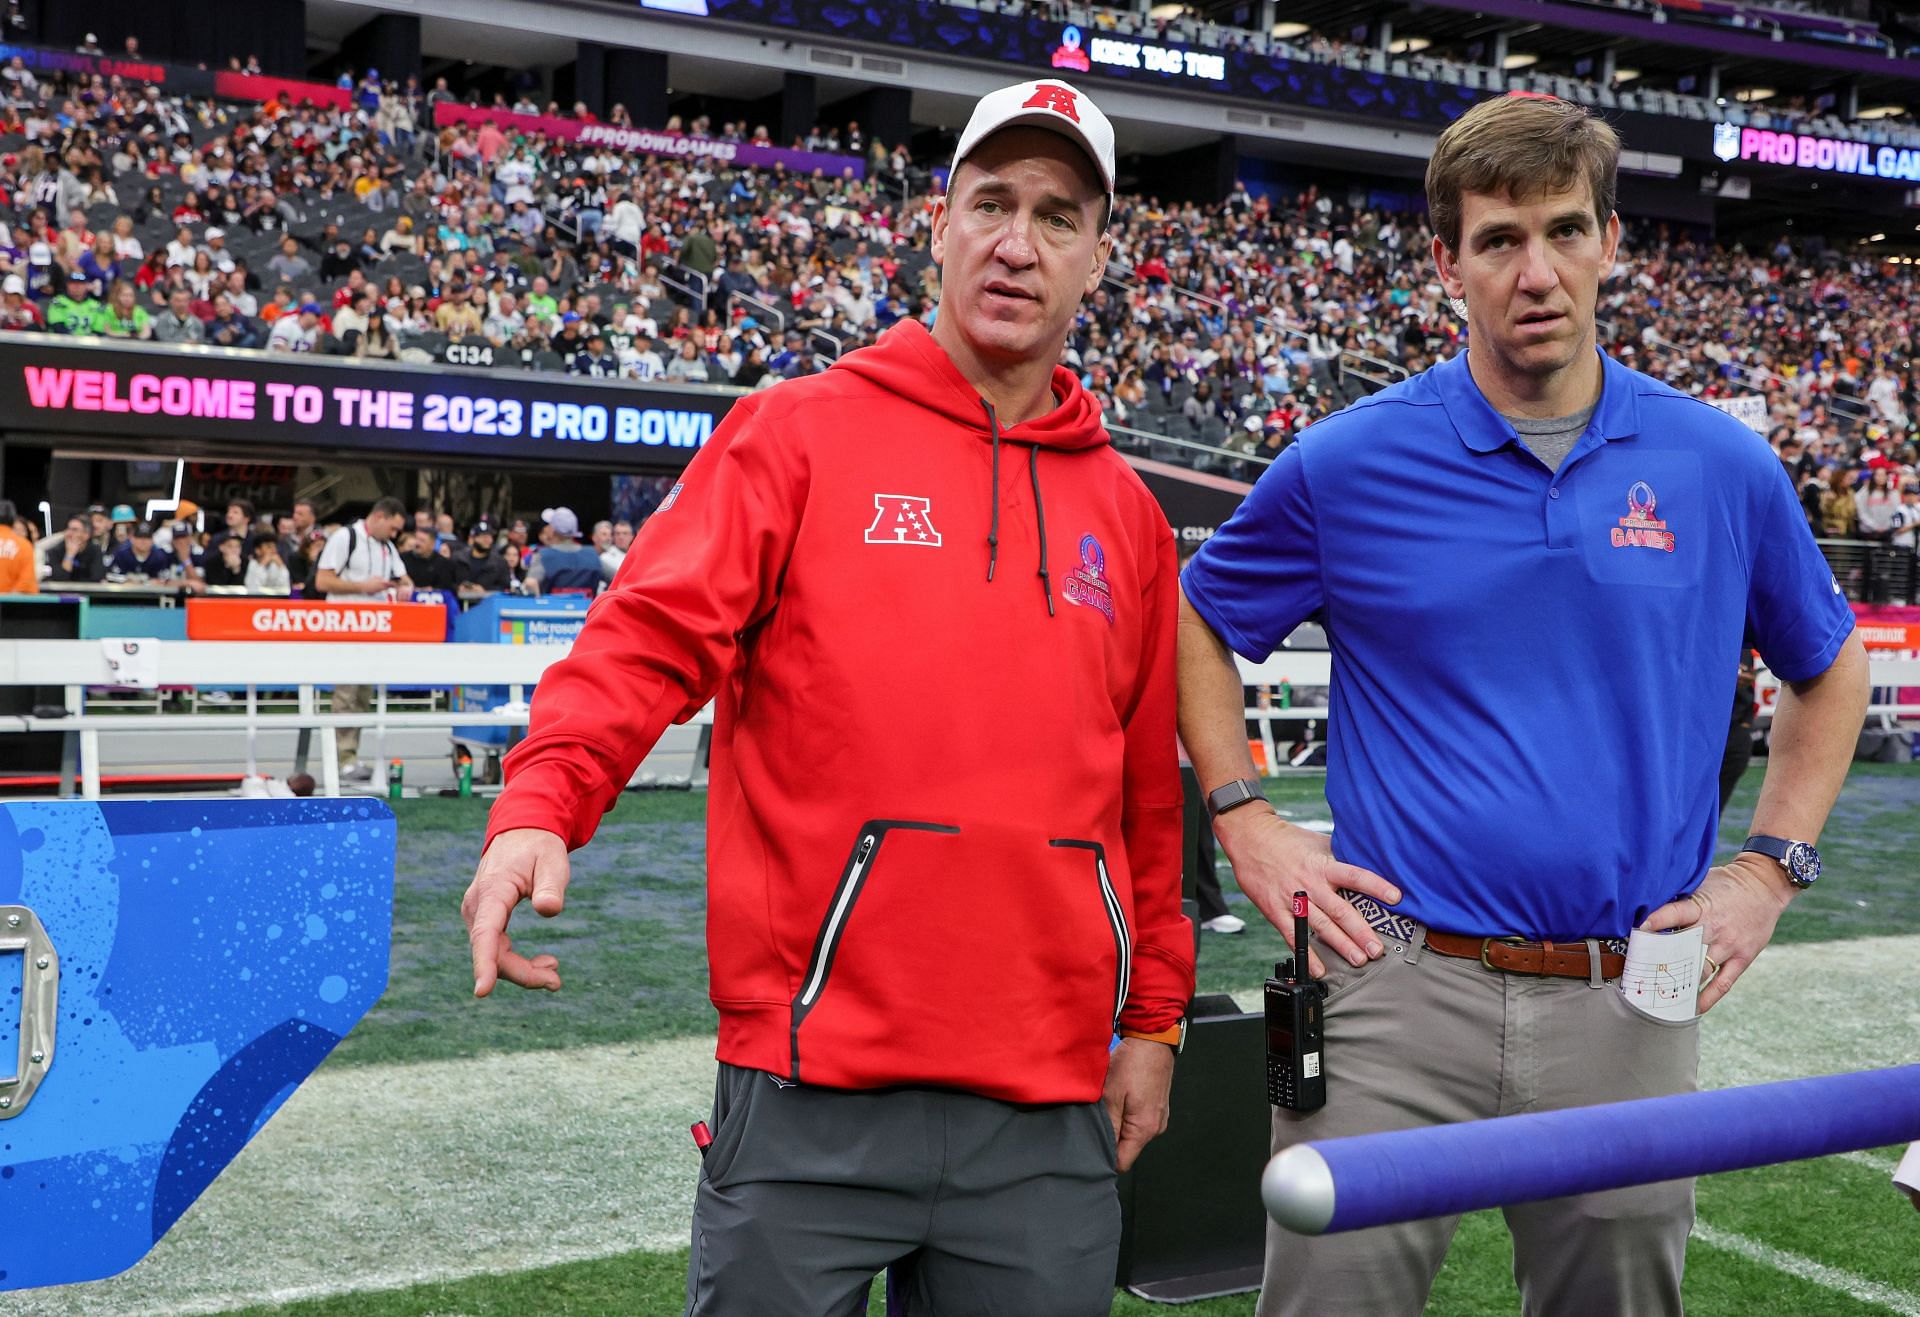 Peyton and Eli Manning during the 2023 NFL Pro Bowl Games